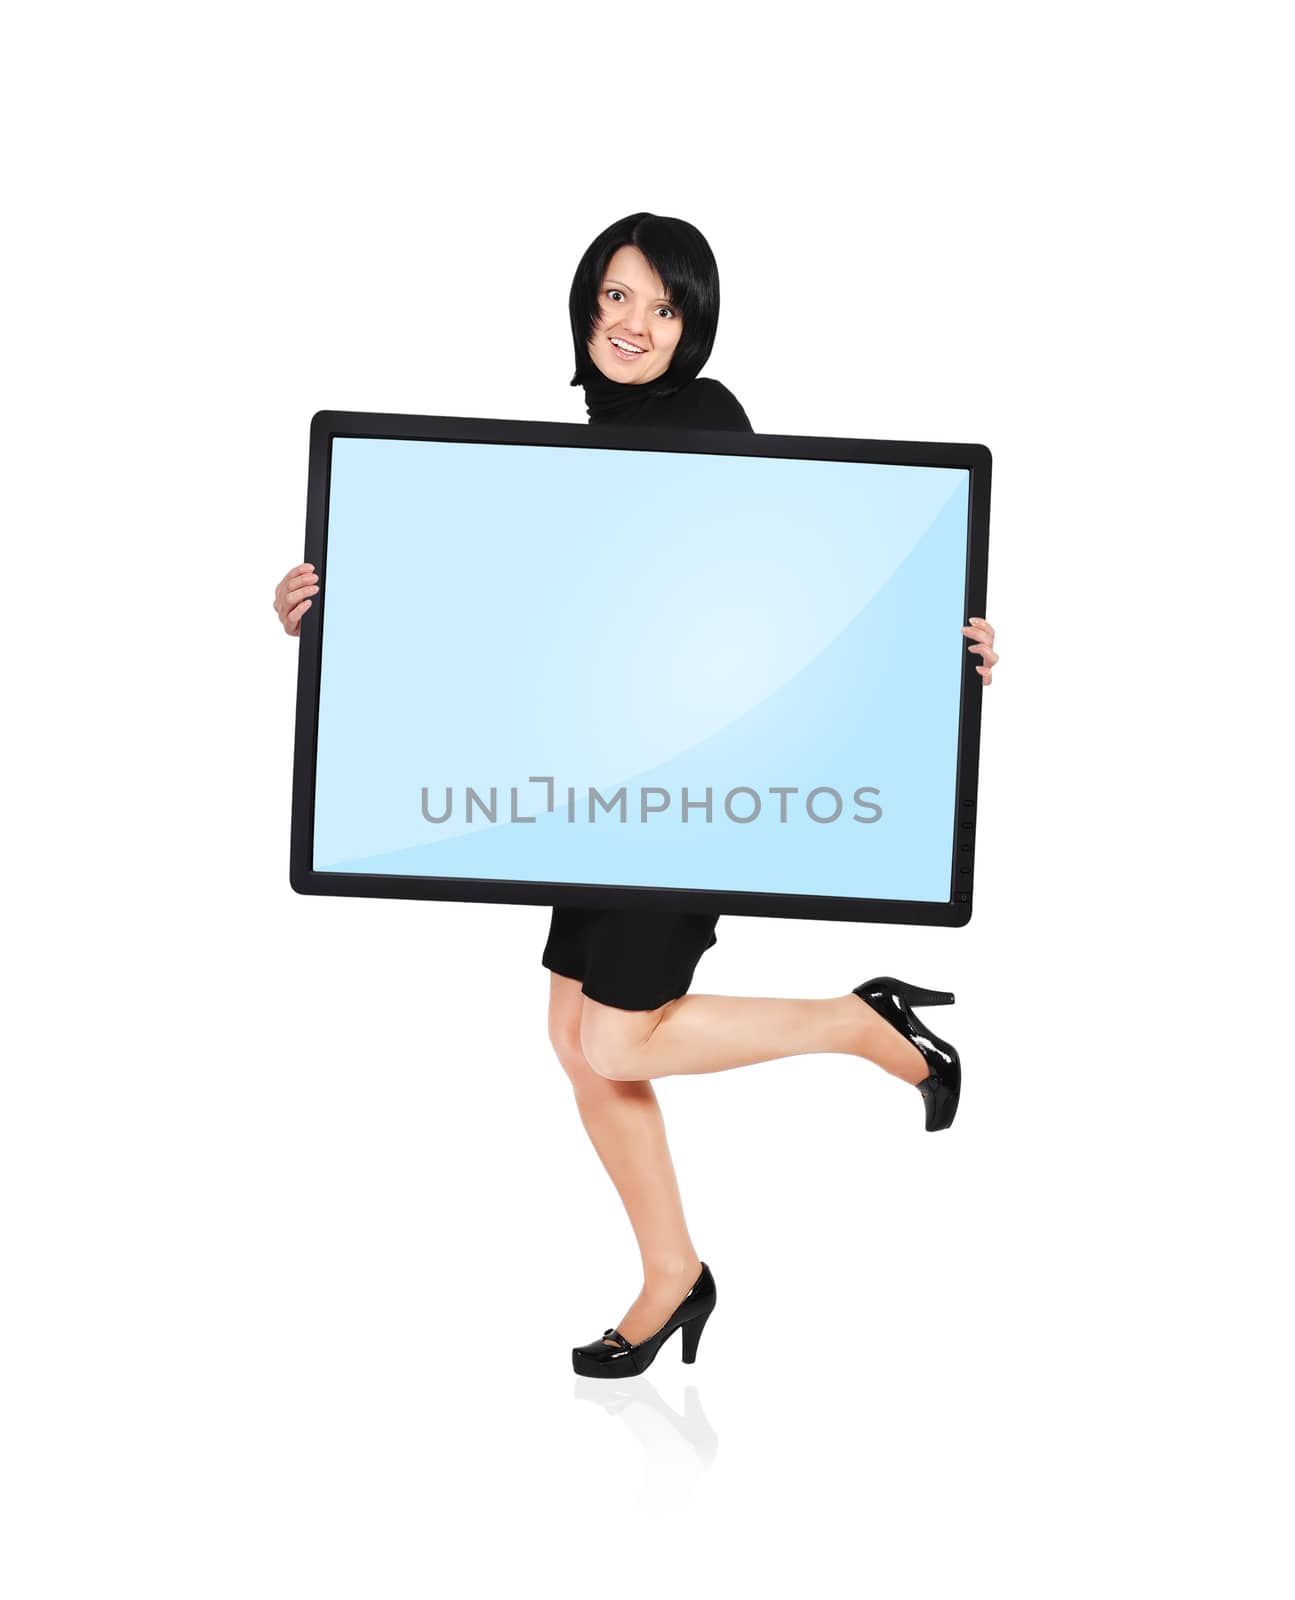 woman holding panel on white background